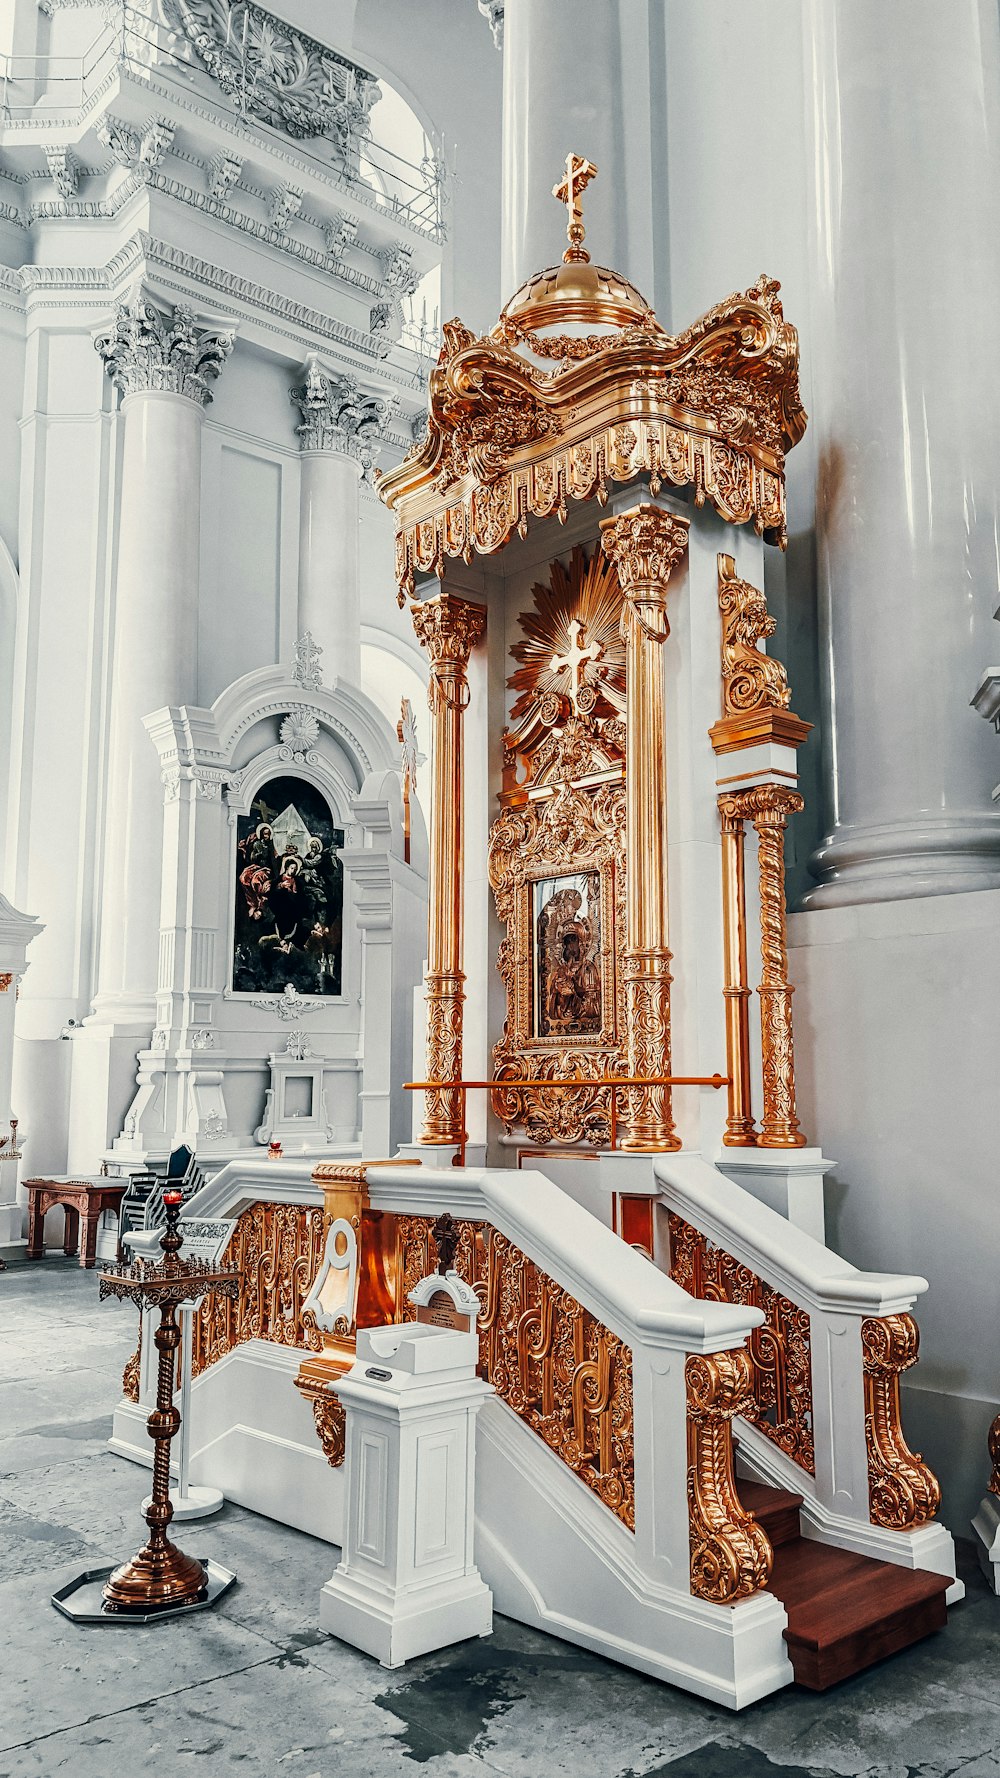 a golden alter in a church with white walls